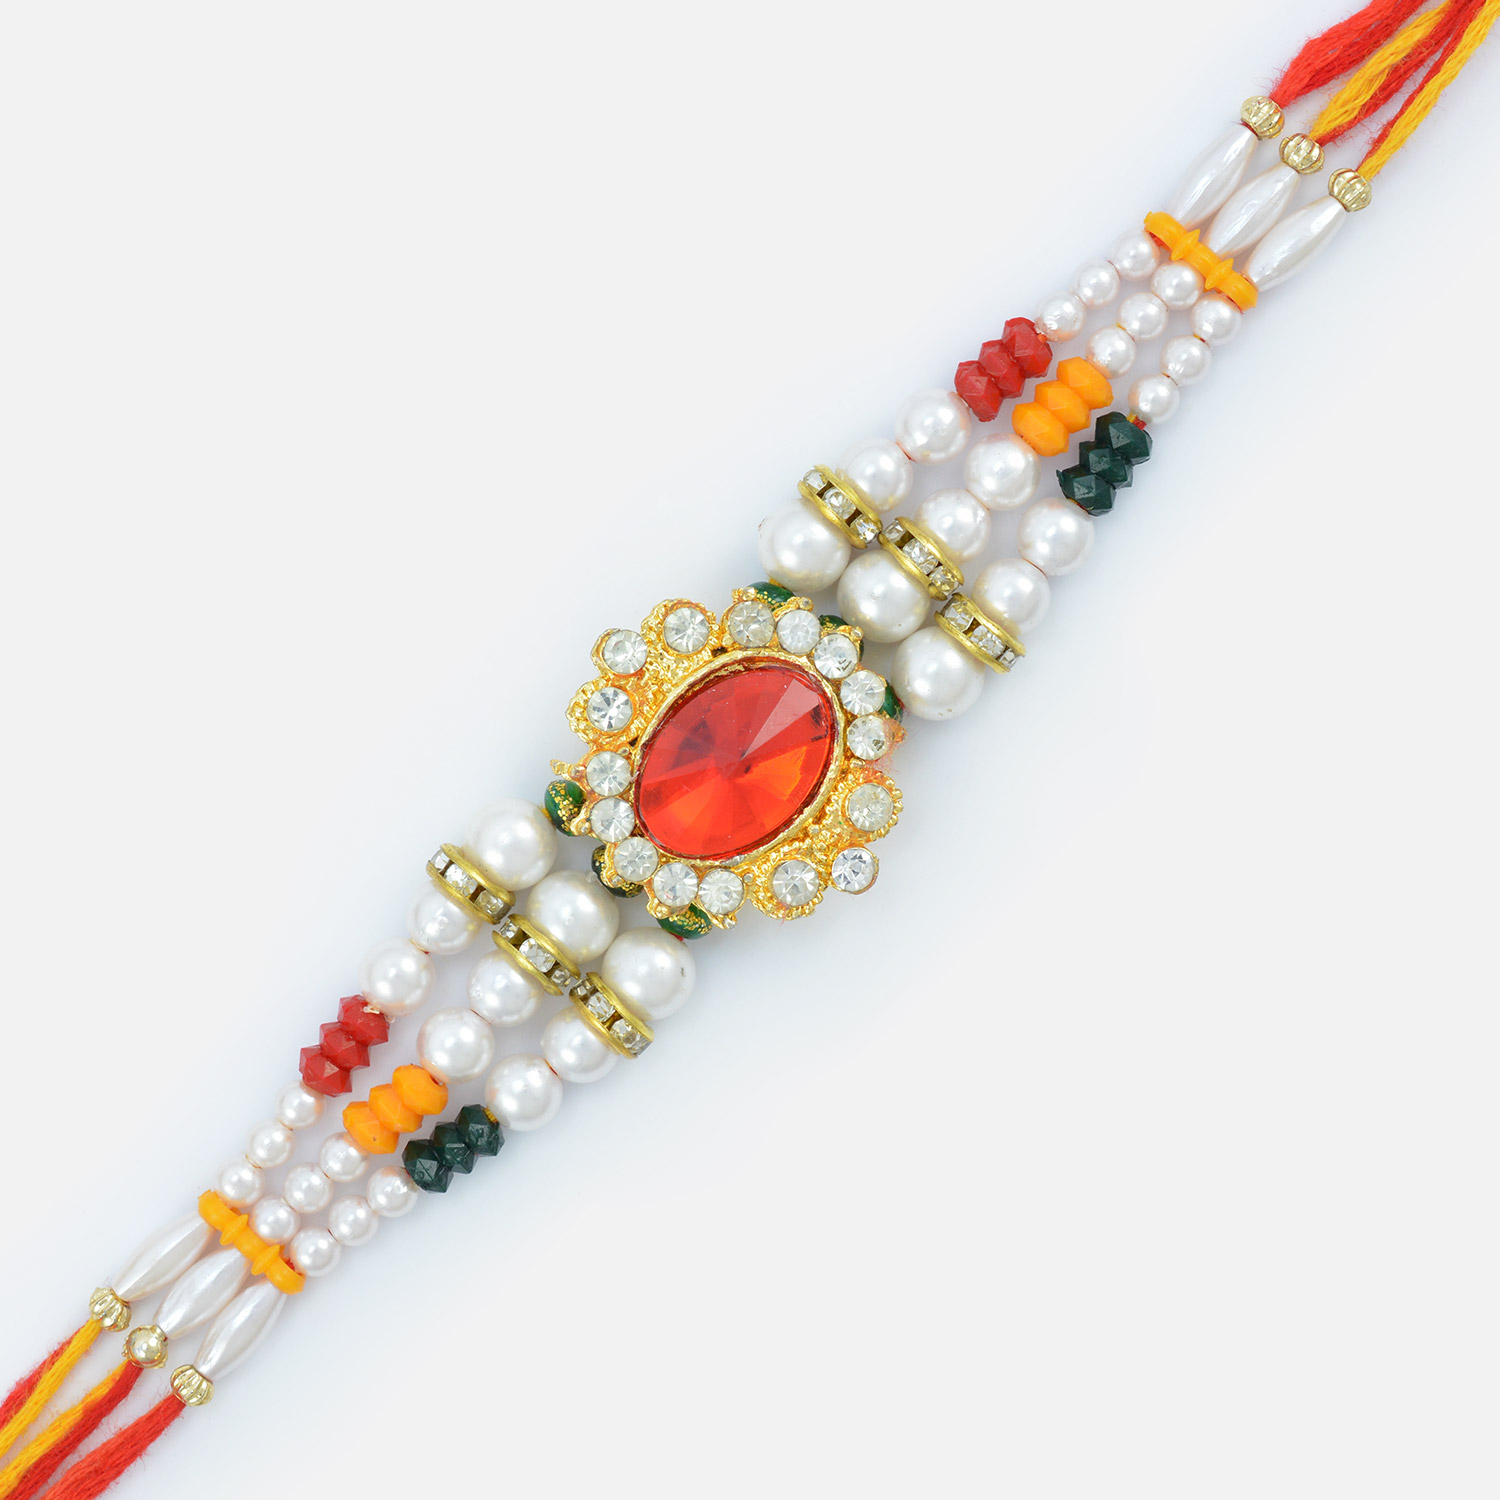 Pearl Emphasized with Ruby and Beads Rakhi for Brother